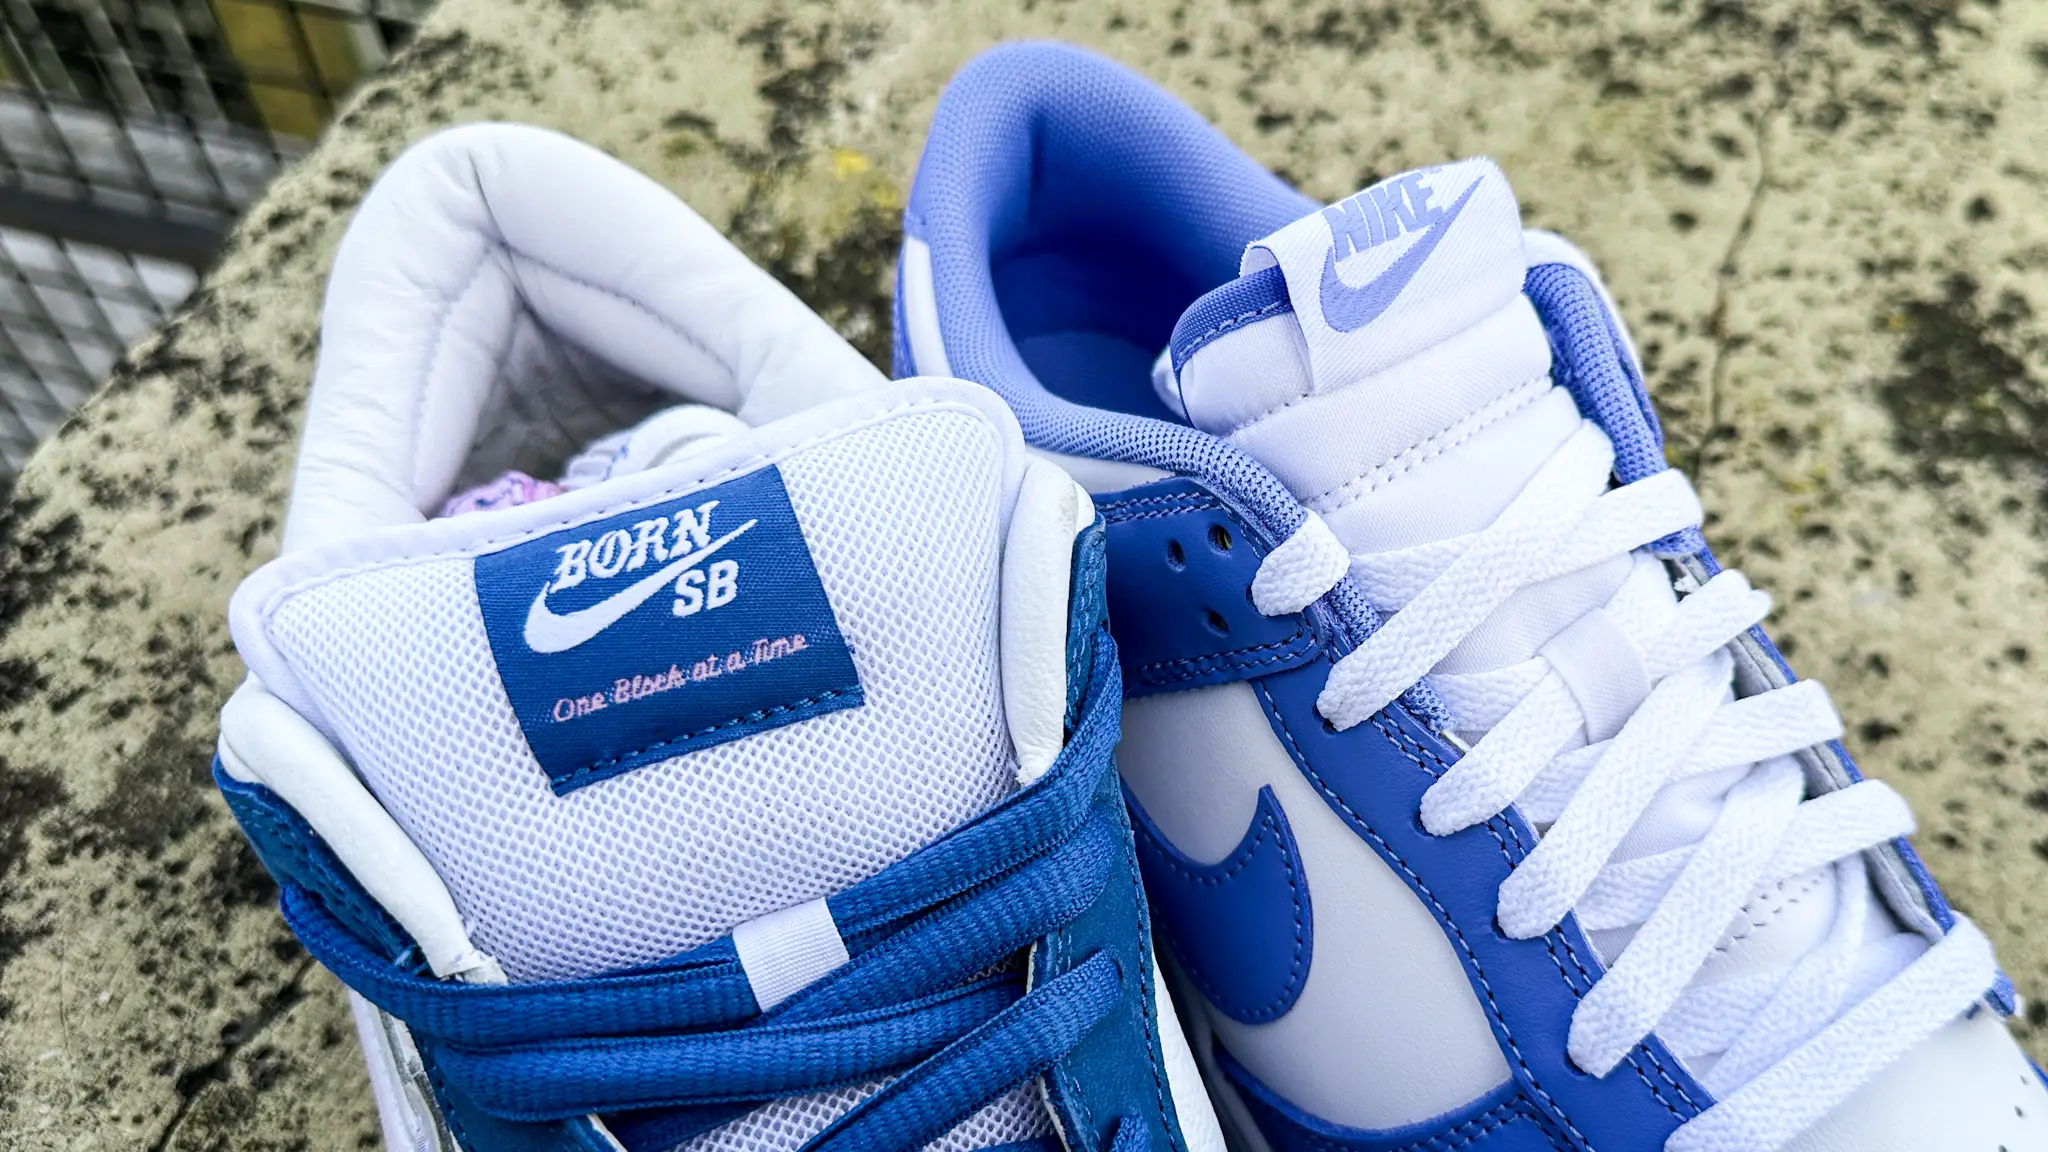 Nike Dunk Low vs. Nike SB Dunk Low: What's the Difference?